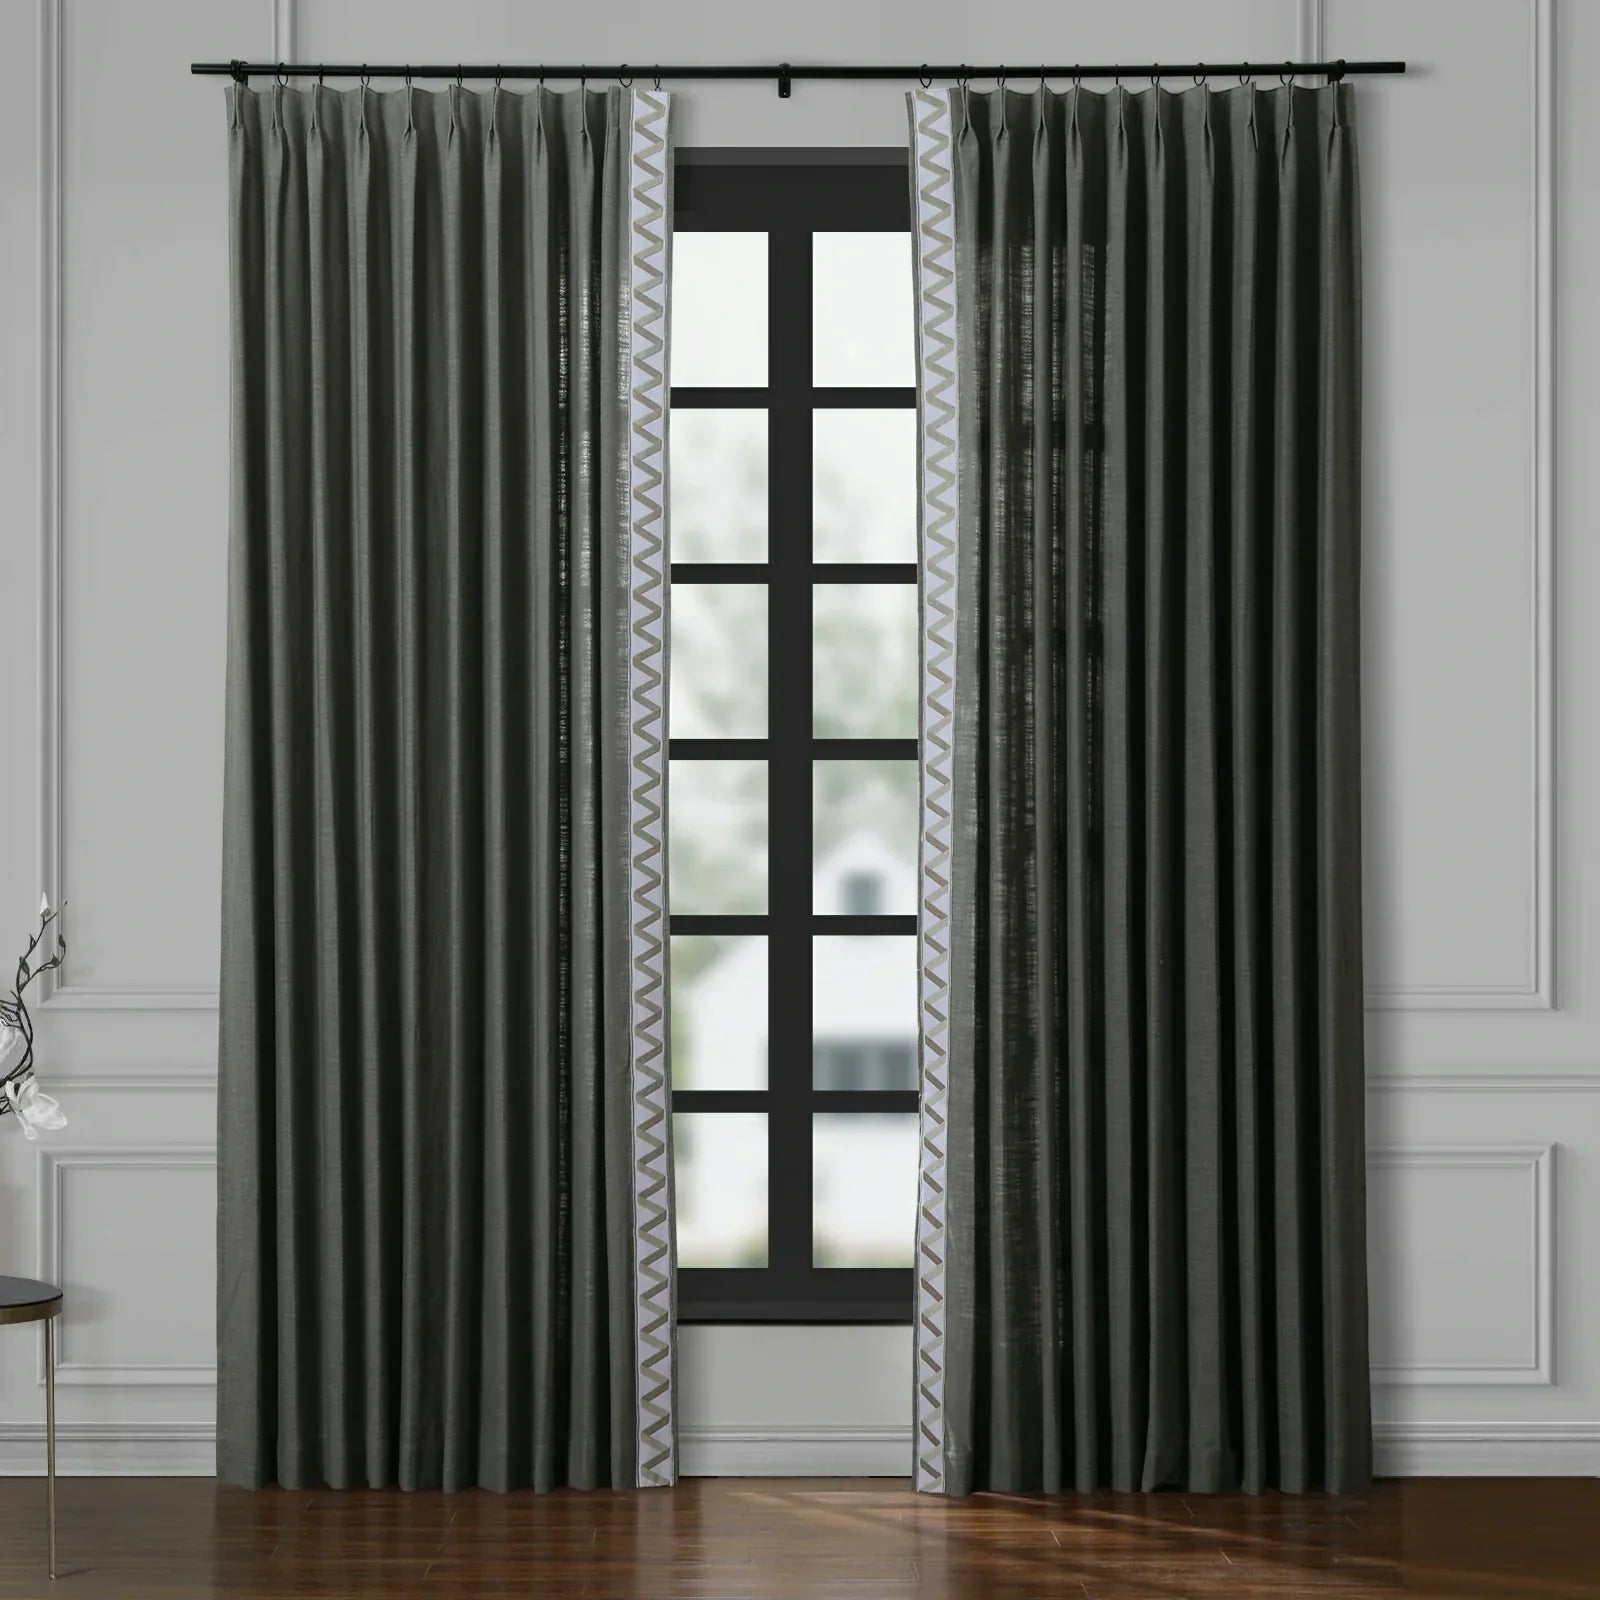 Loomy Modern 38 Colors Polyester Linen Sheer Curtains Living Room/Bedroom 